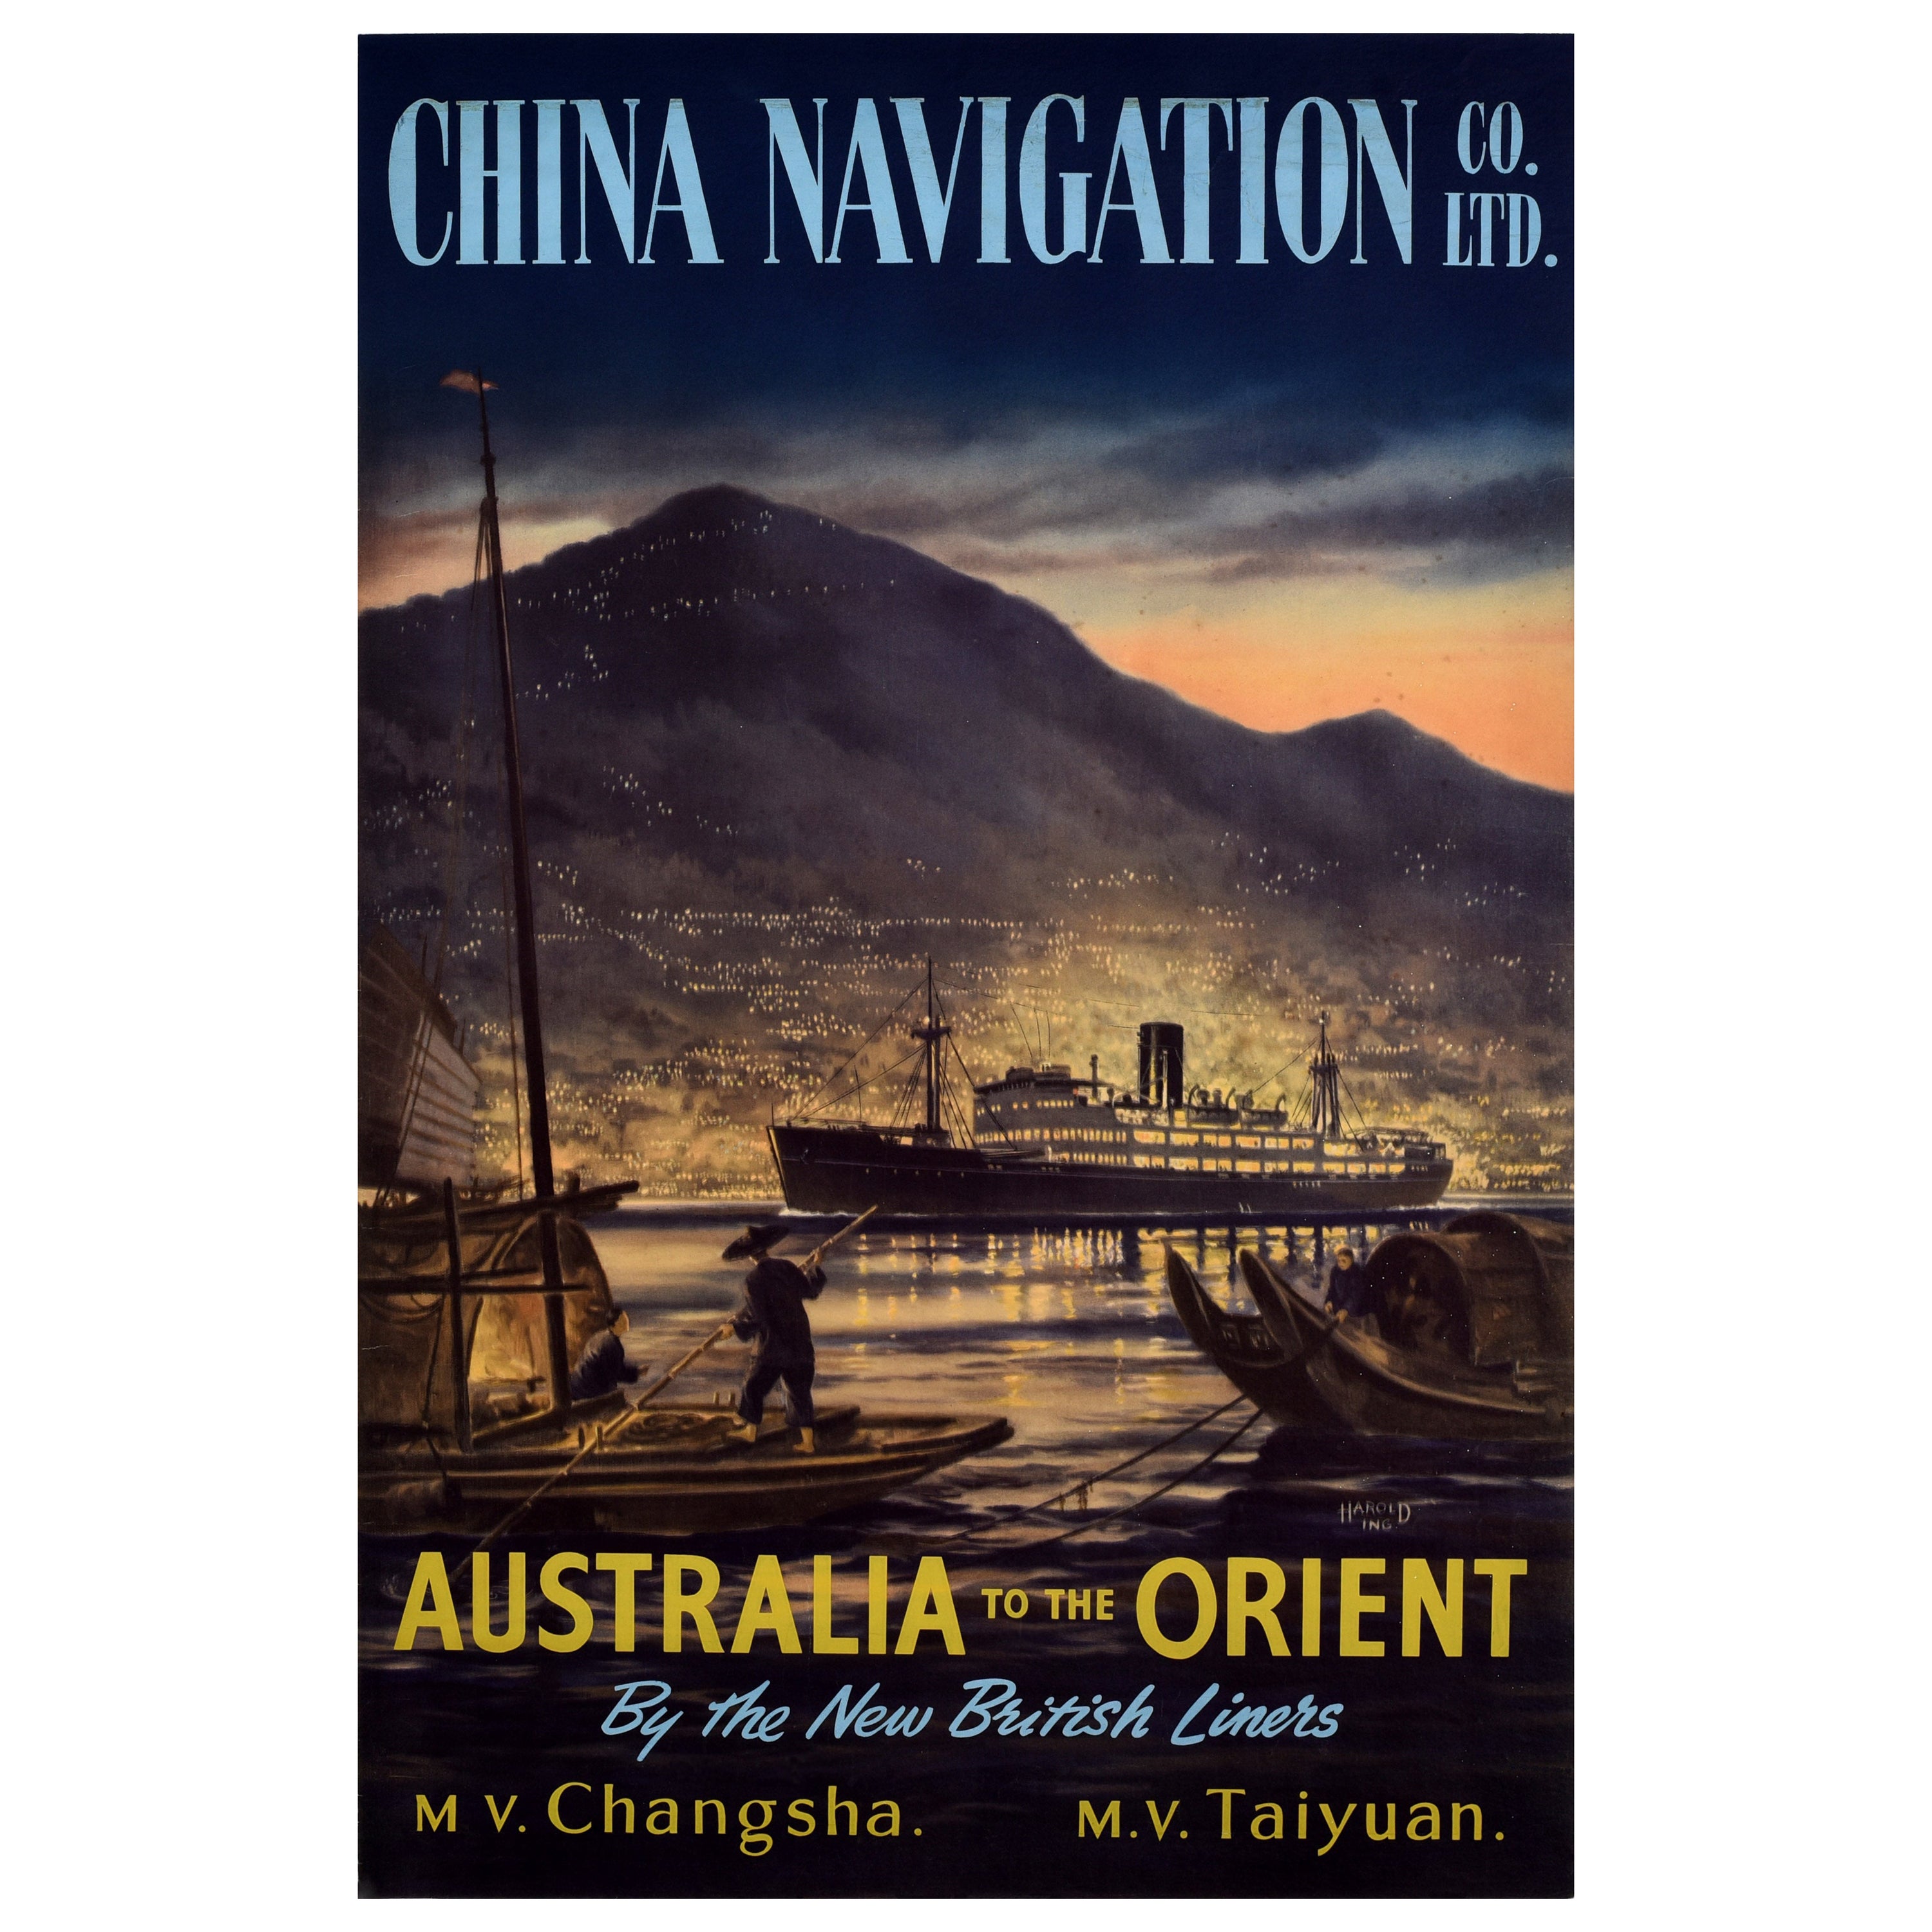 Original Vintage Cruise Travel Poster China Navigation Australia To The Orient For Sale